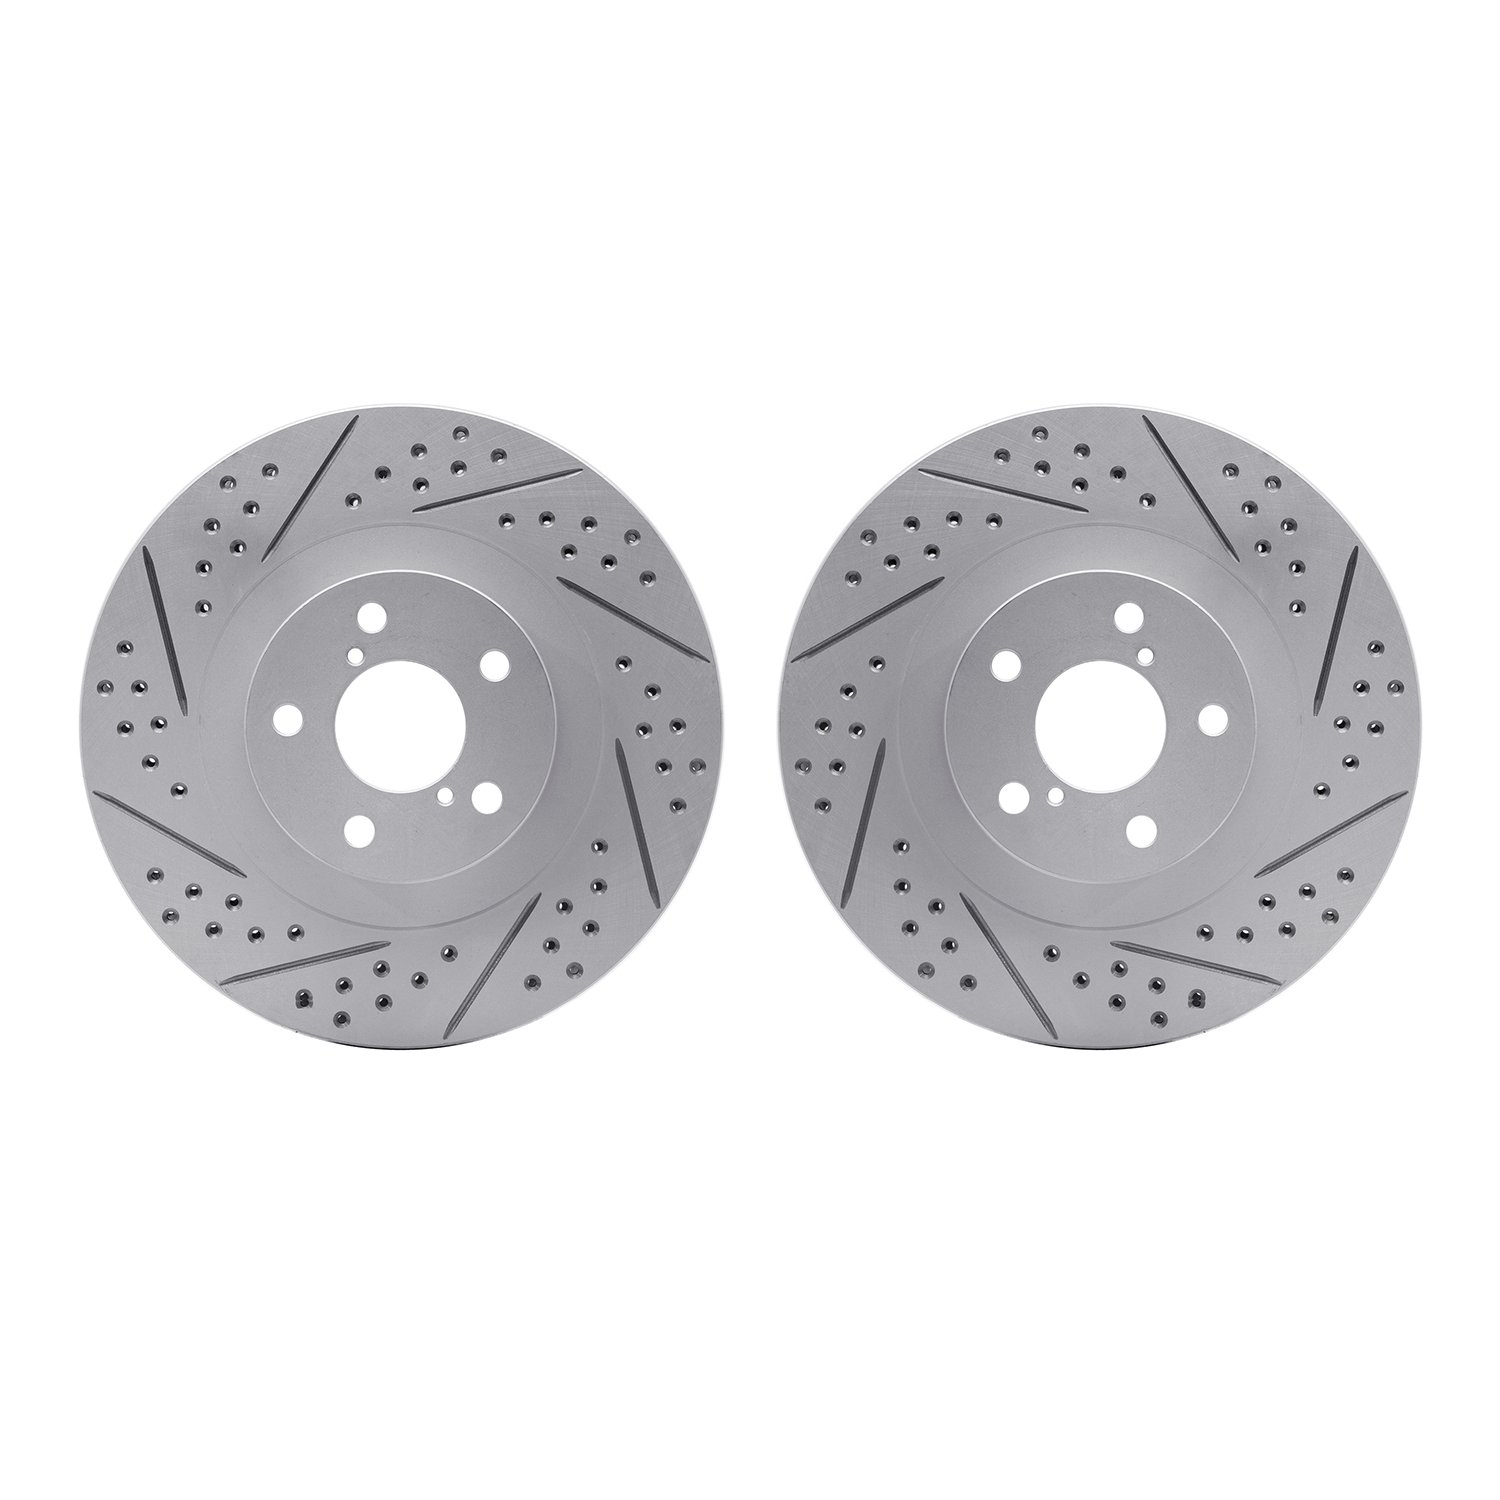 2002-13000 Geoperformance Drilled/Slotted Brake Rotors, 2001-2008 GM, Position: Front